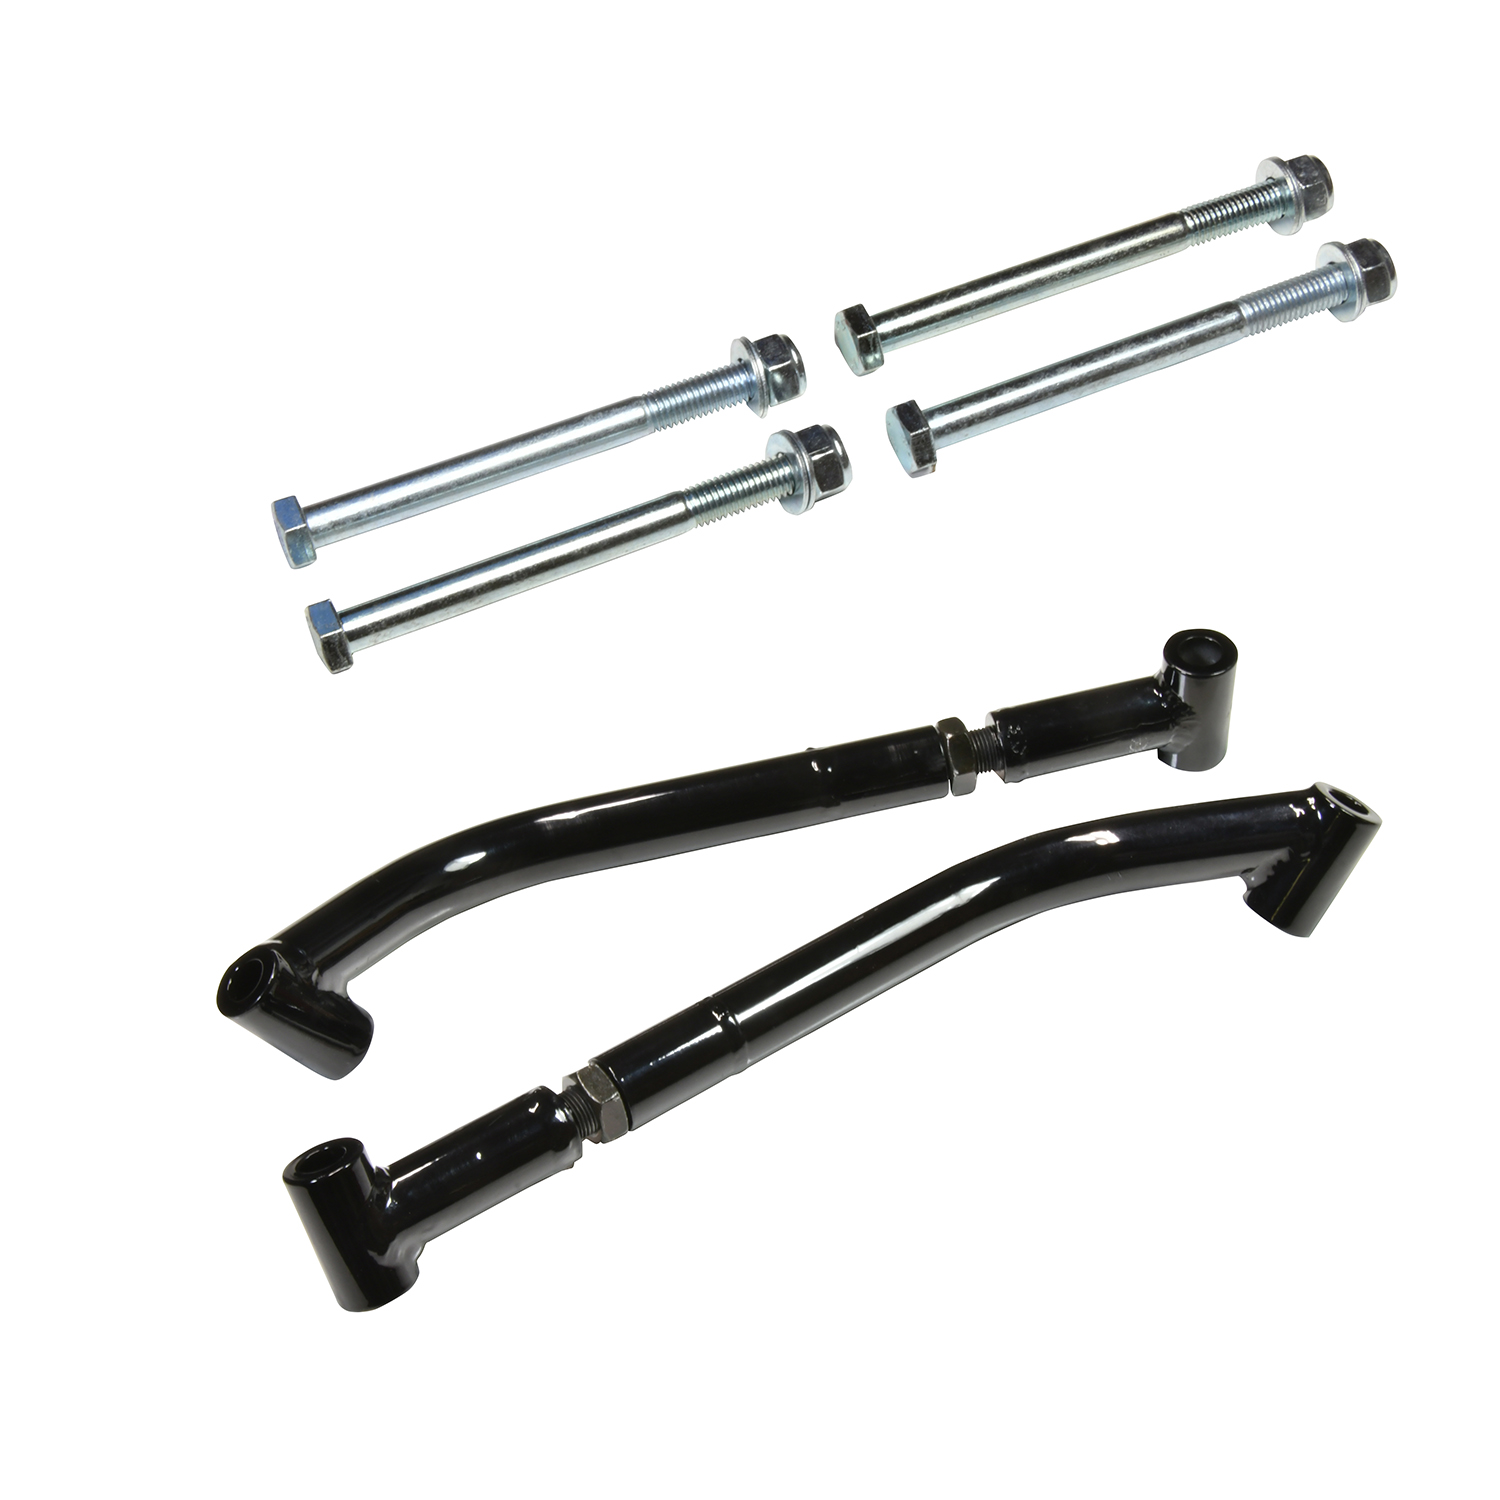 1978-1988 GM A/G Body Trailing Arm Mount Braces from Hotchkis Sport Suspension